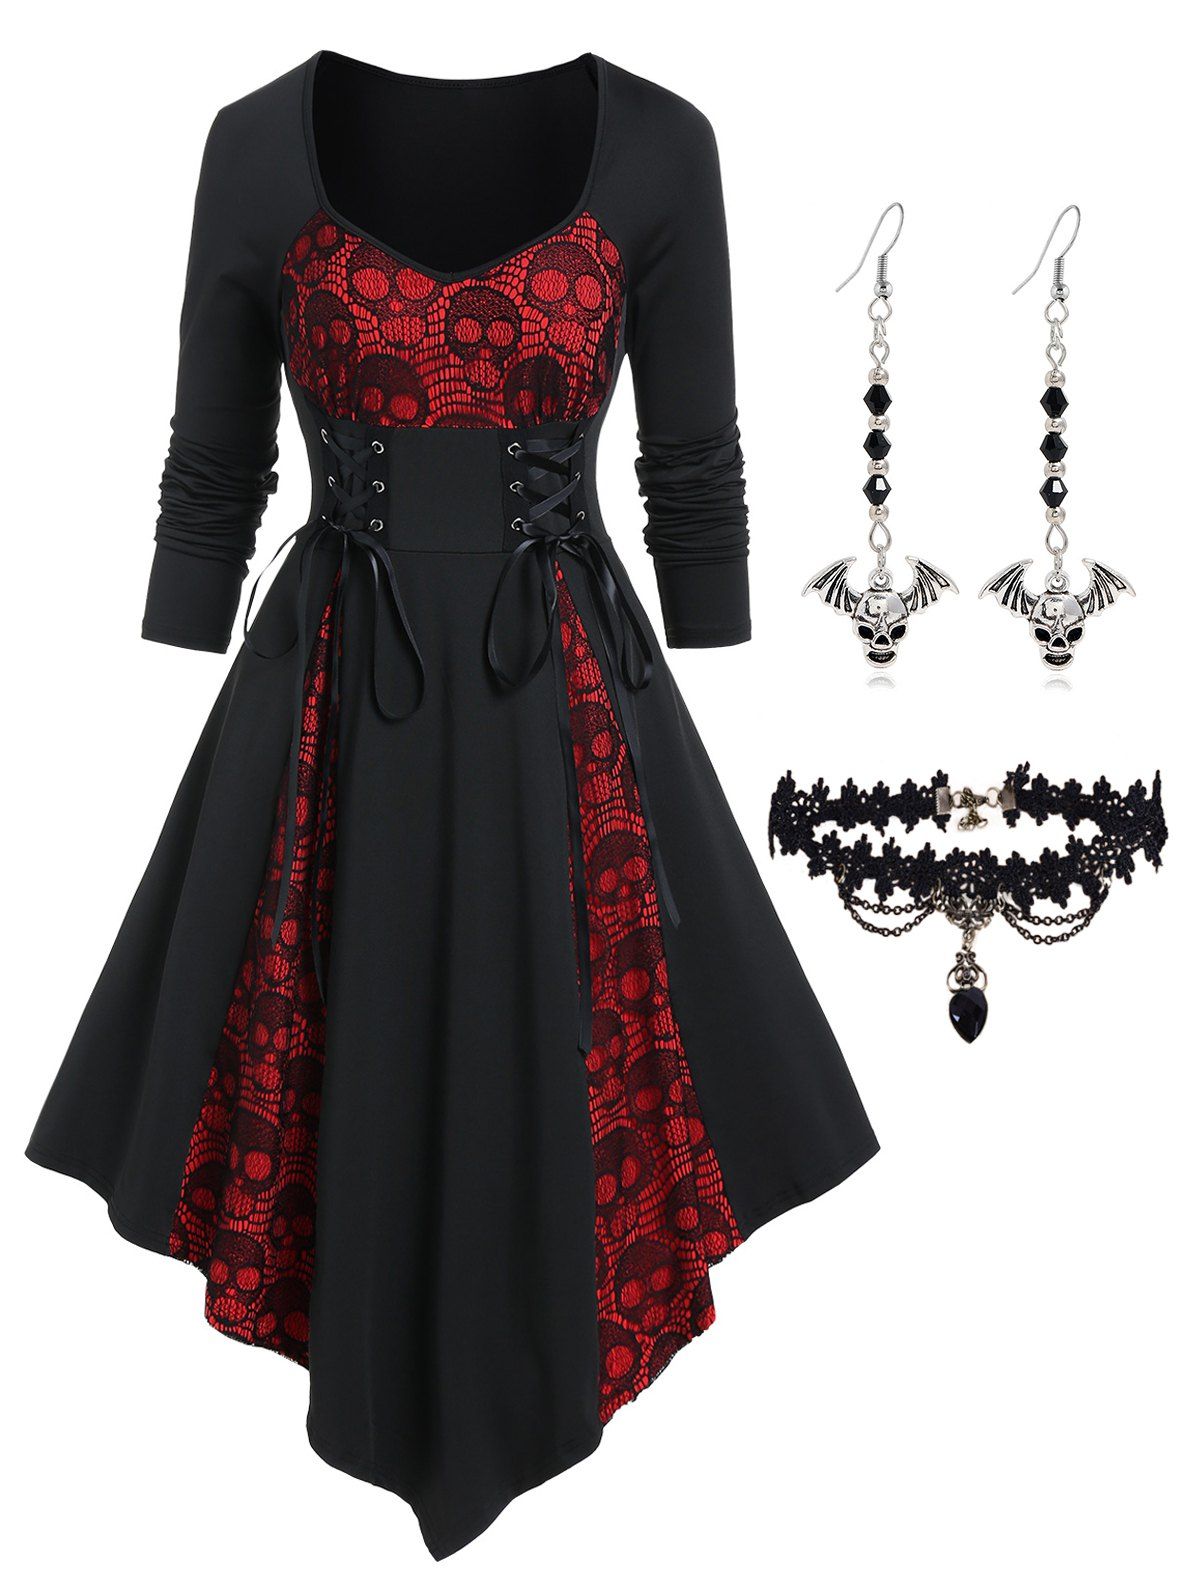 Colorblock Skull Lace Godet Lace Up Pointed Hem Midi Dress And Heart Lace Choker Earrings Gothic Outfit - BLACK S